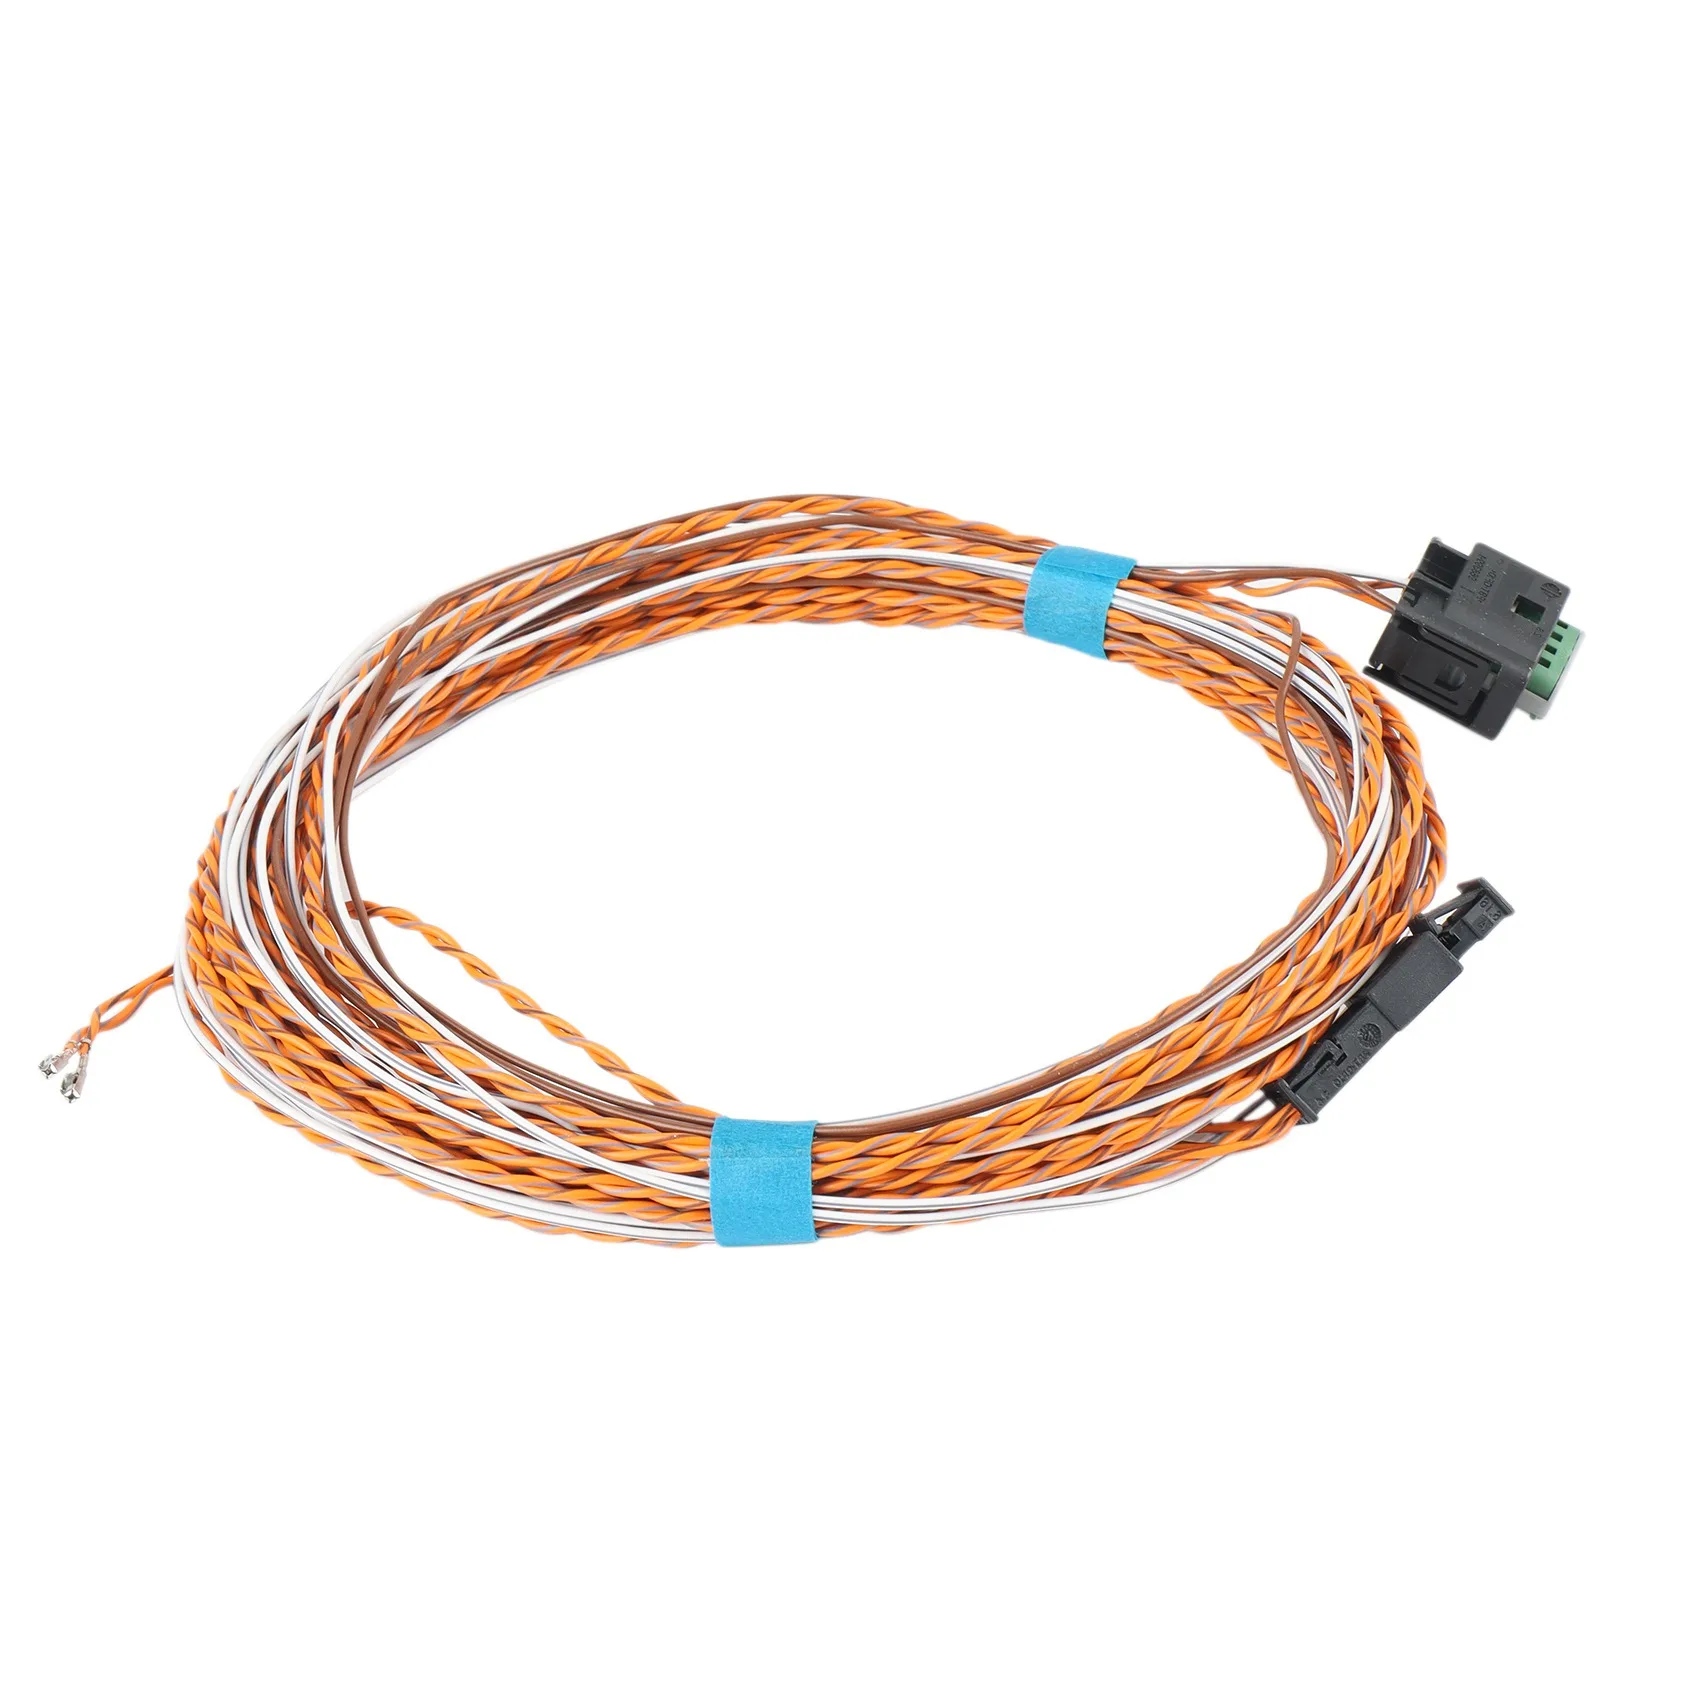 

Monitoring System Tire Pressure Warning Cable Wire Harness for Passat B6 B7 B8 CC GOLF 6 7 Jet Ta Tiguan TMPS